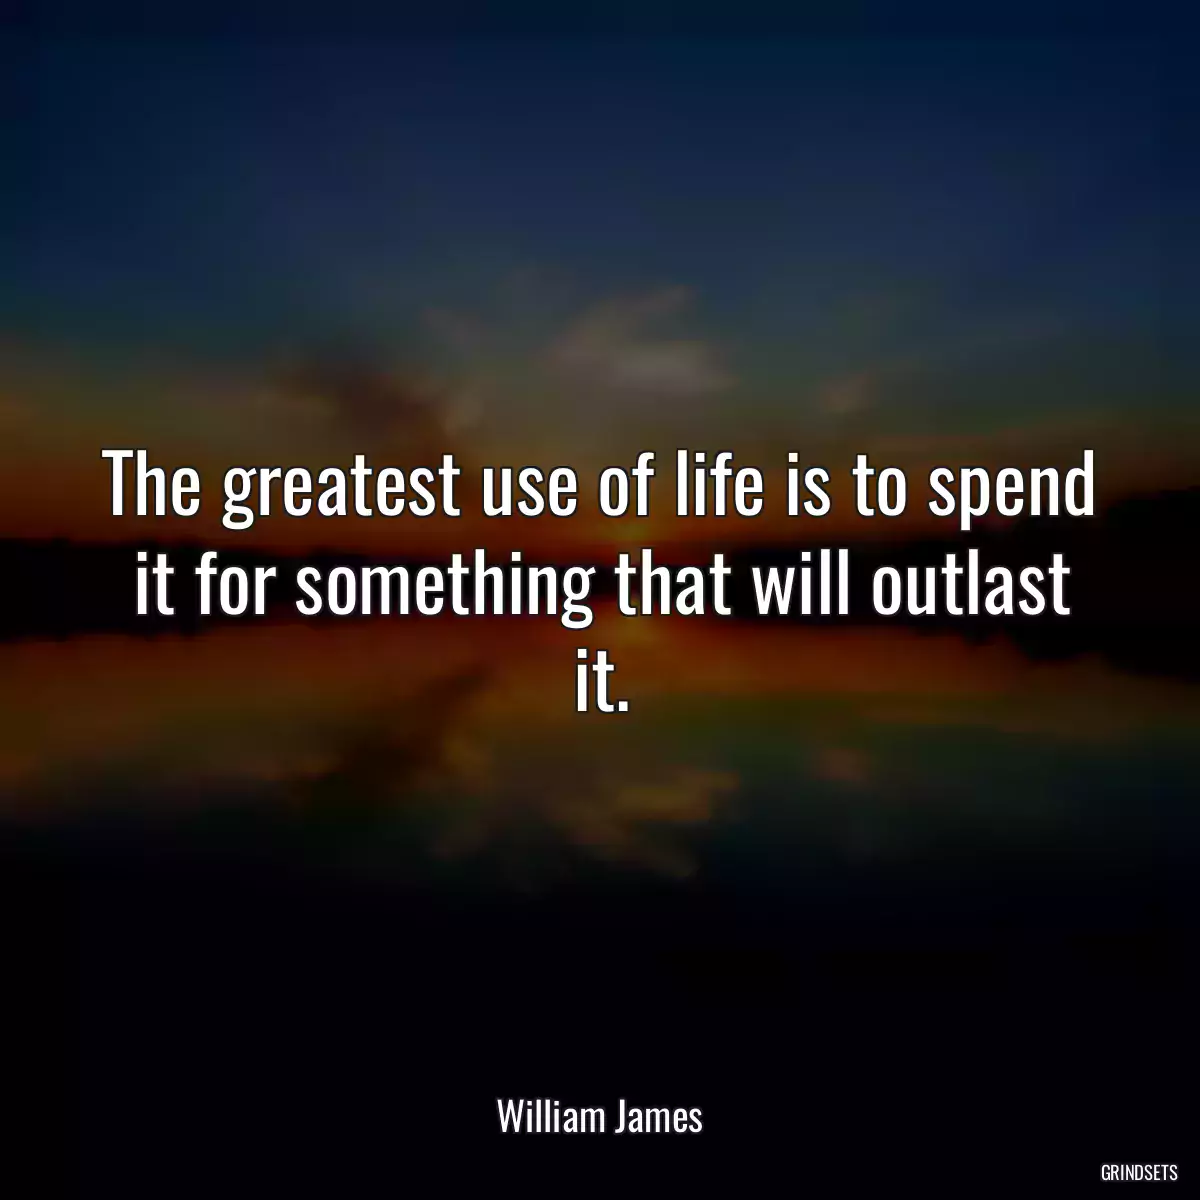 The greatest use of life is to spend it for something that will outlast it.